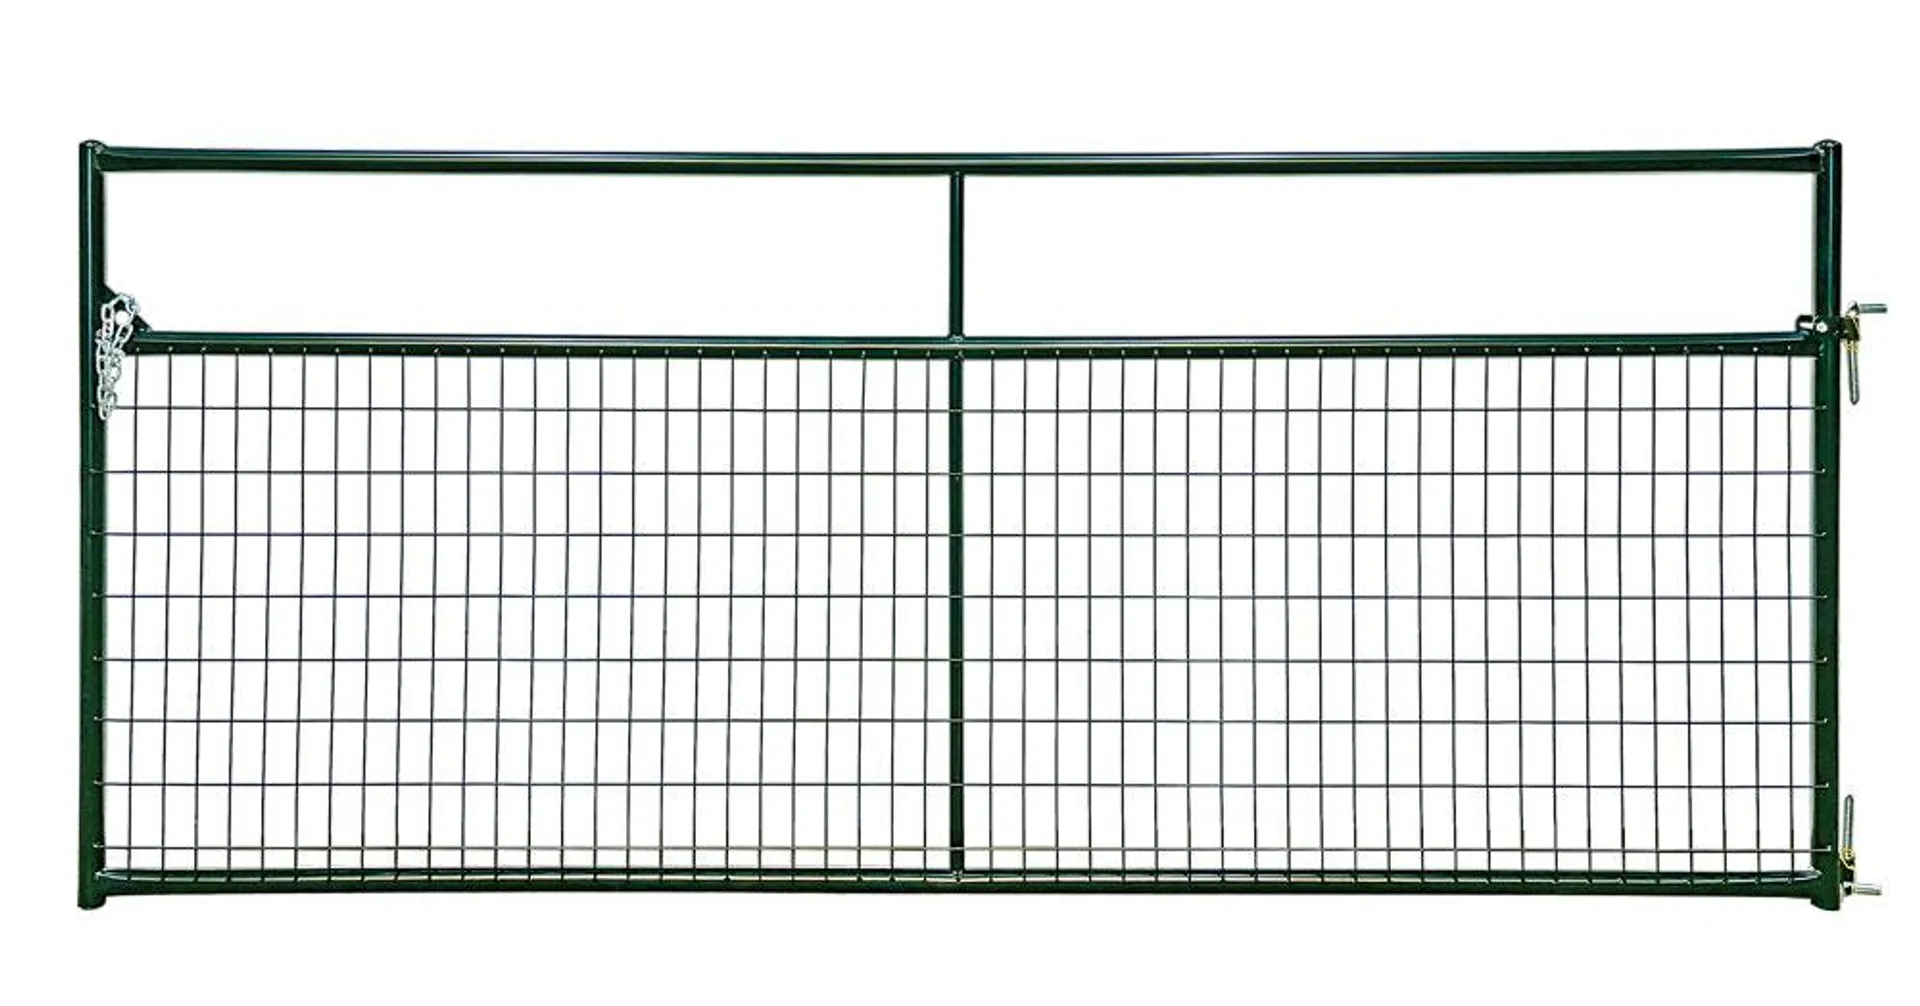 RWGG12 Wire-Filled Economy Gate, 12 ft W Gate, 50-1/2 in H Gate, 20 ga Frame Tube/Channel, 8 ga Mesh Wire